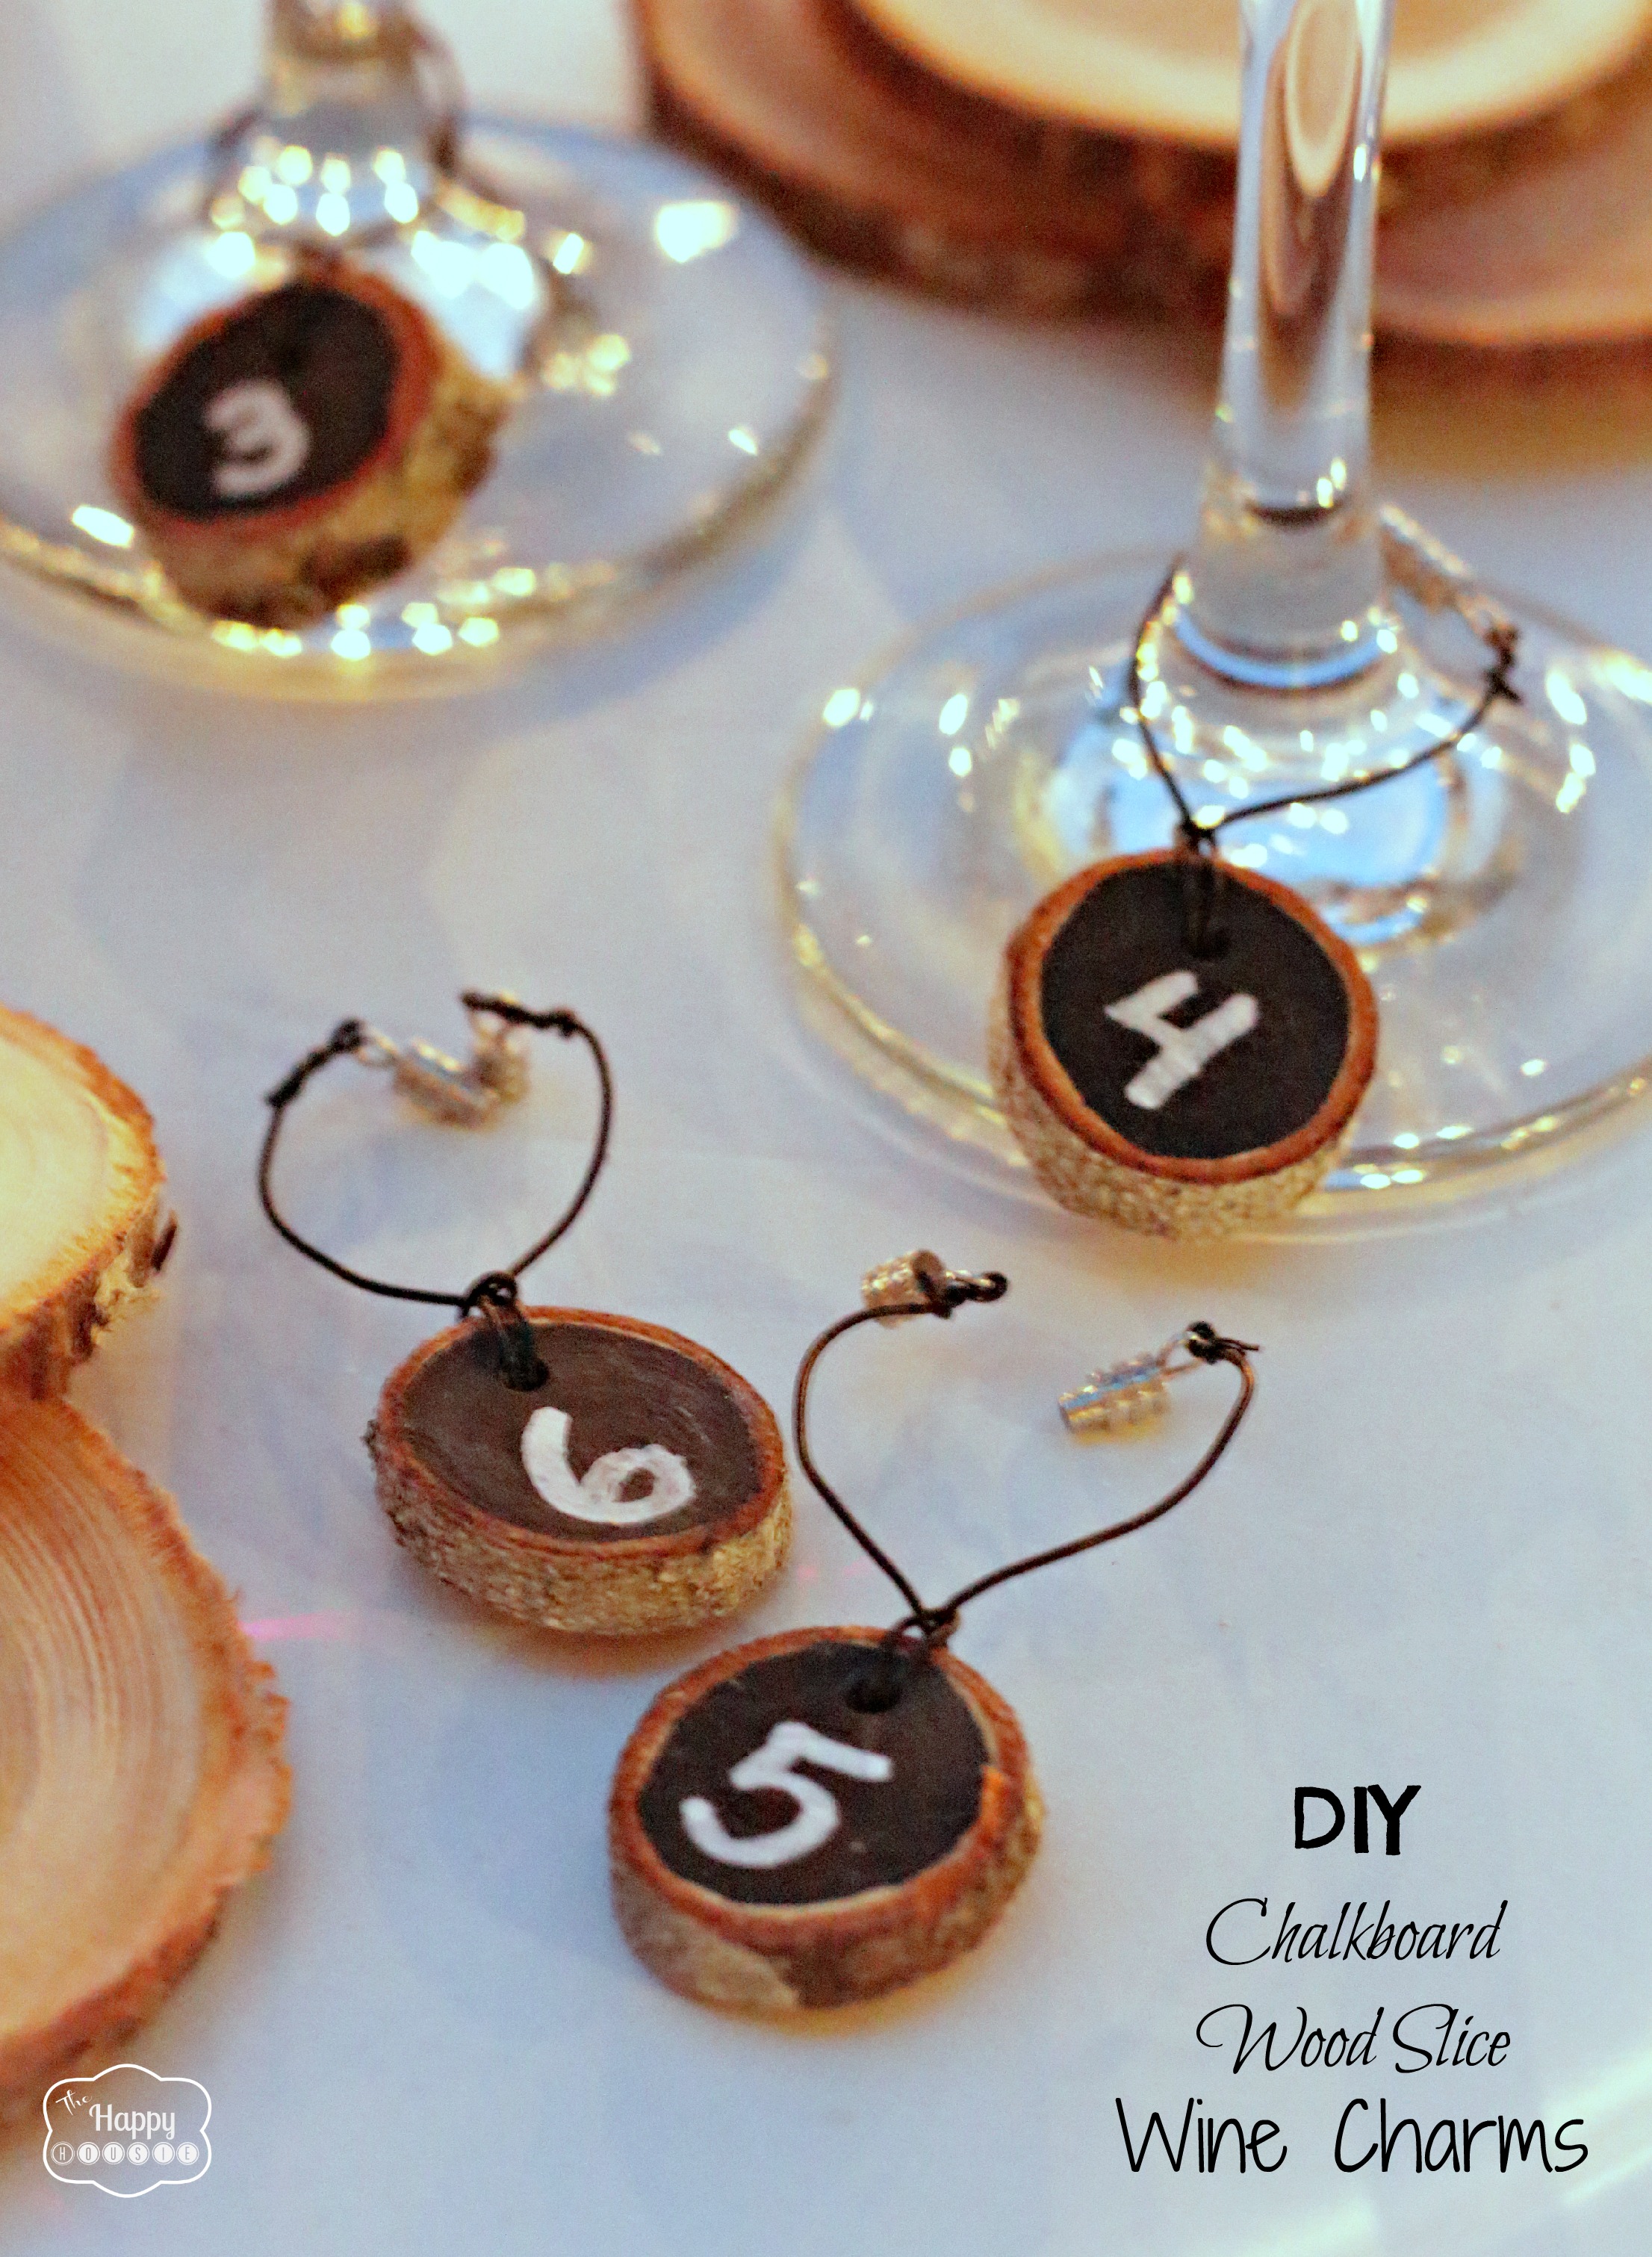 DIY Chalkboard Wood Slice Wine Charms {don’t lose your glass!}